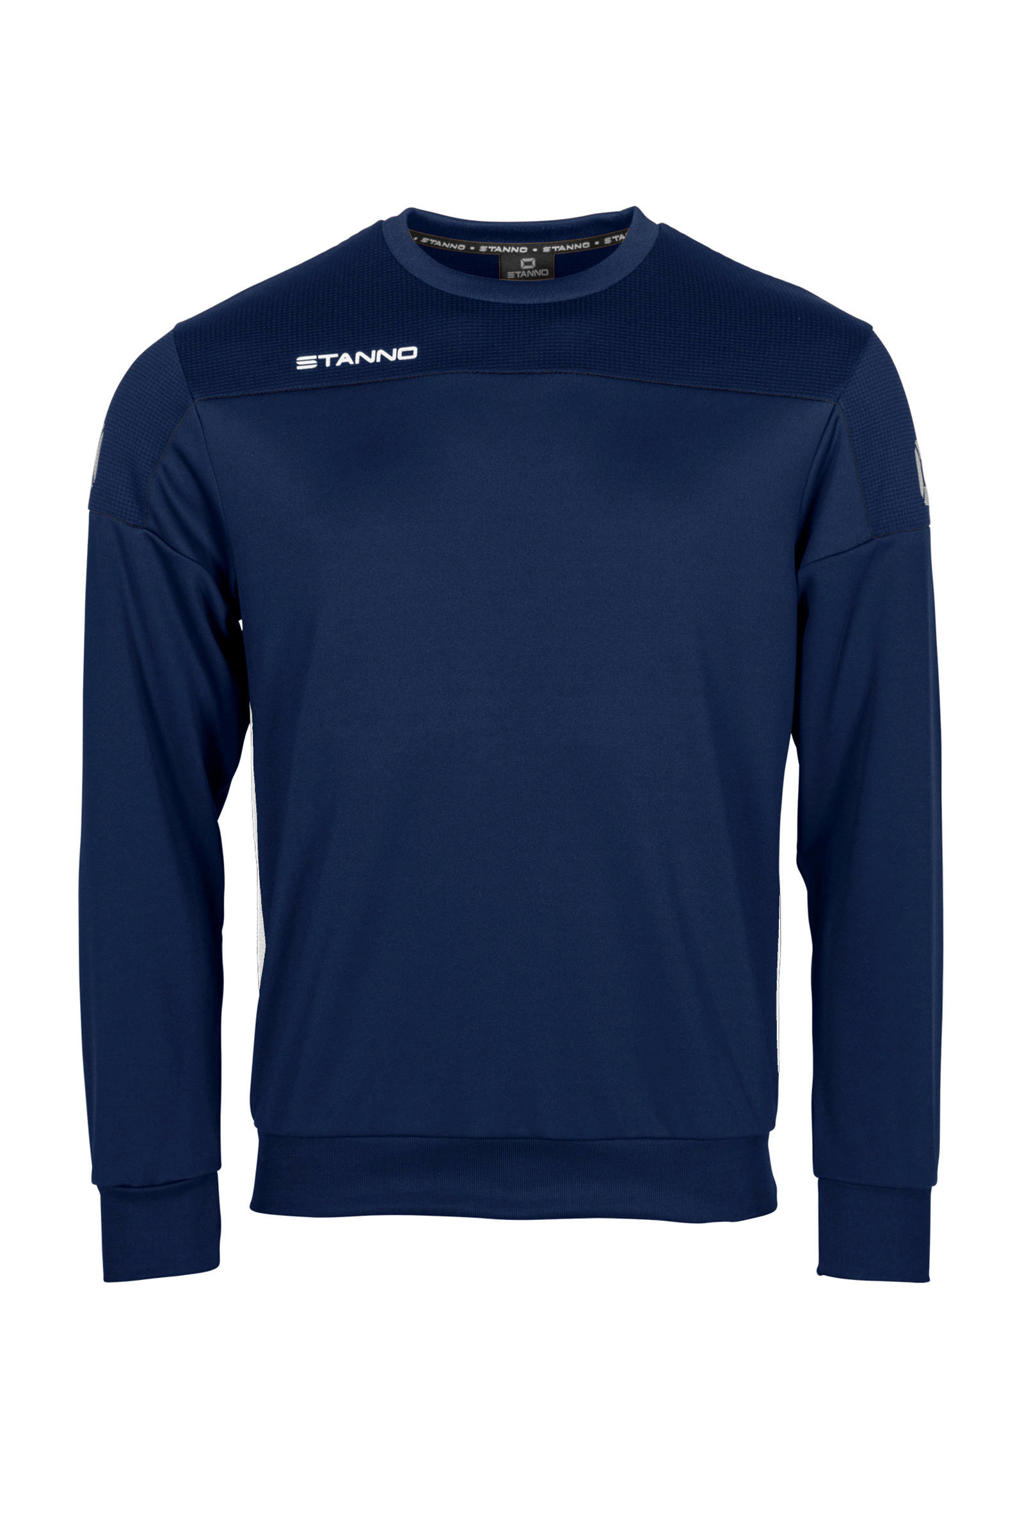 Stanno   voetbalsweater donkerblauw/wit